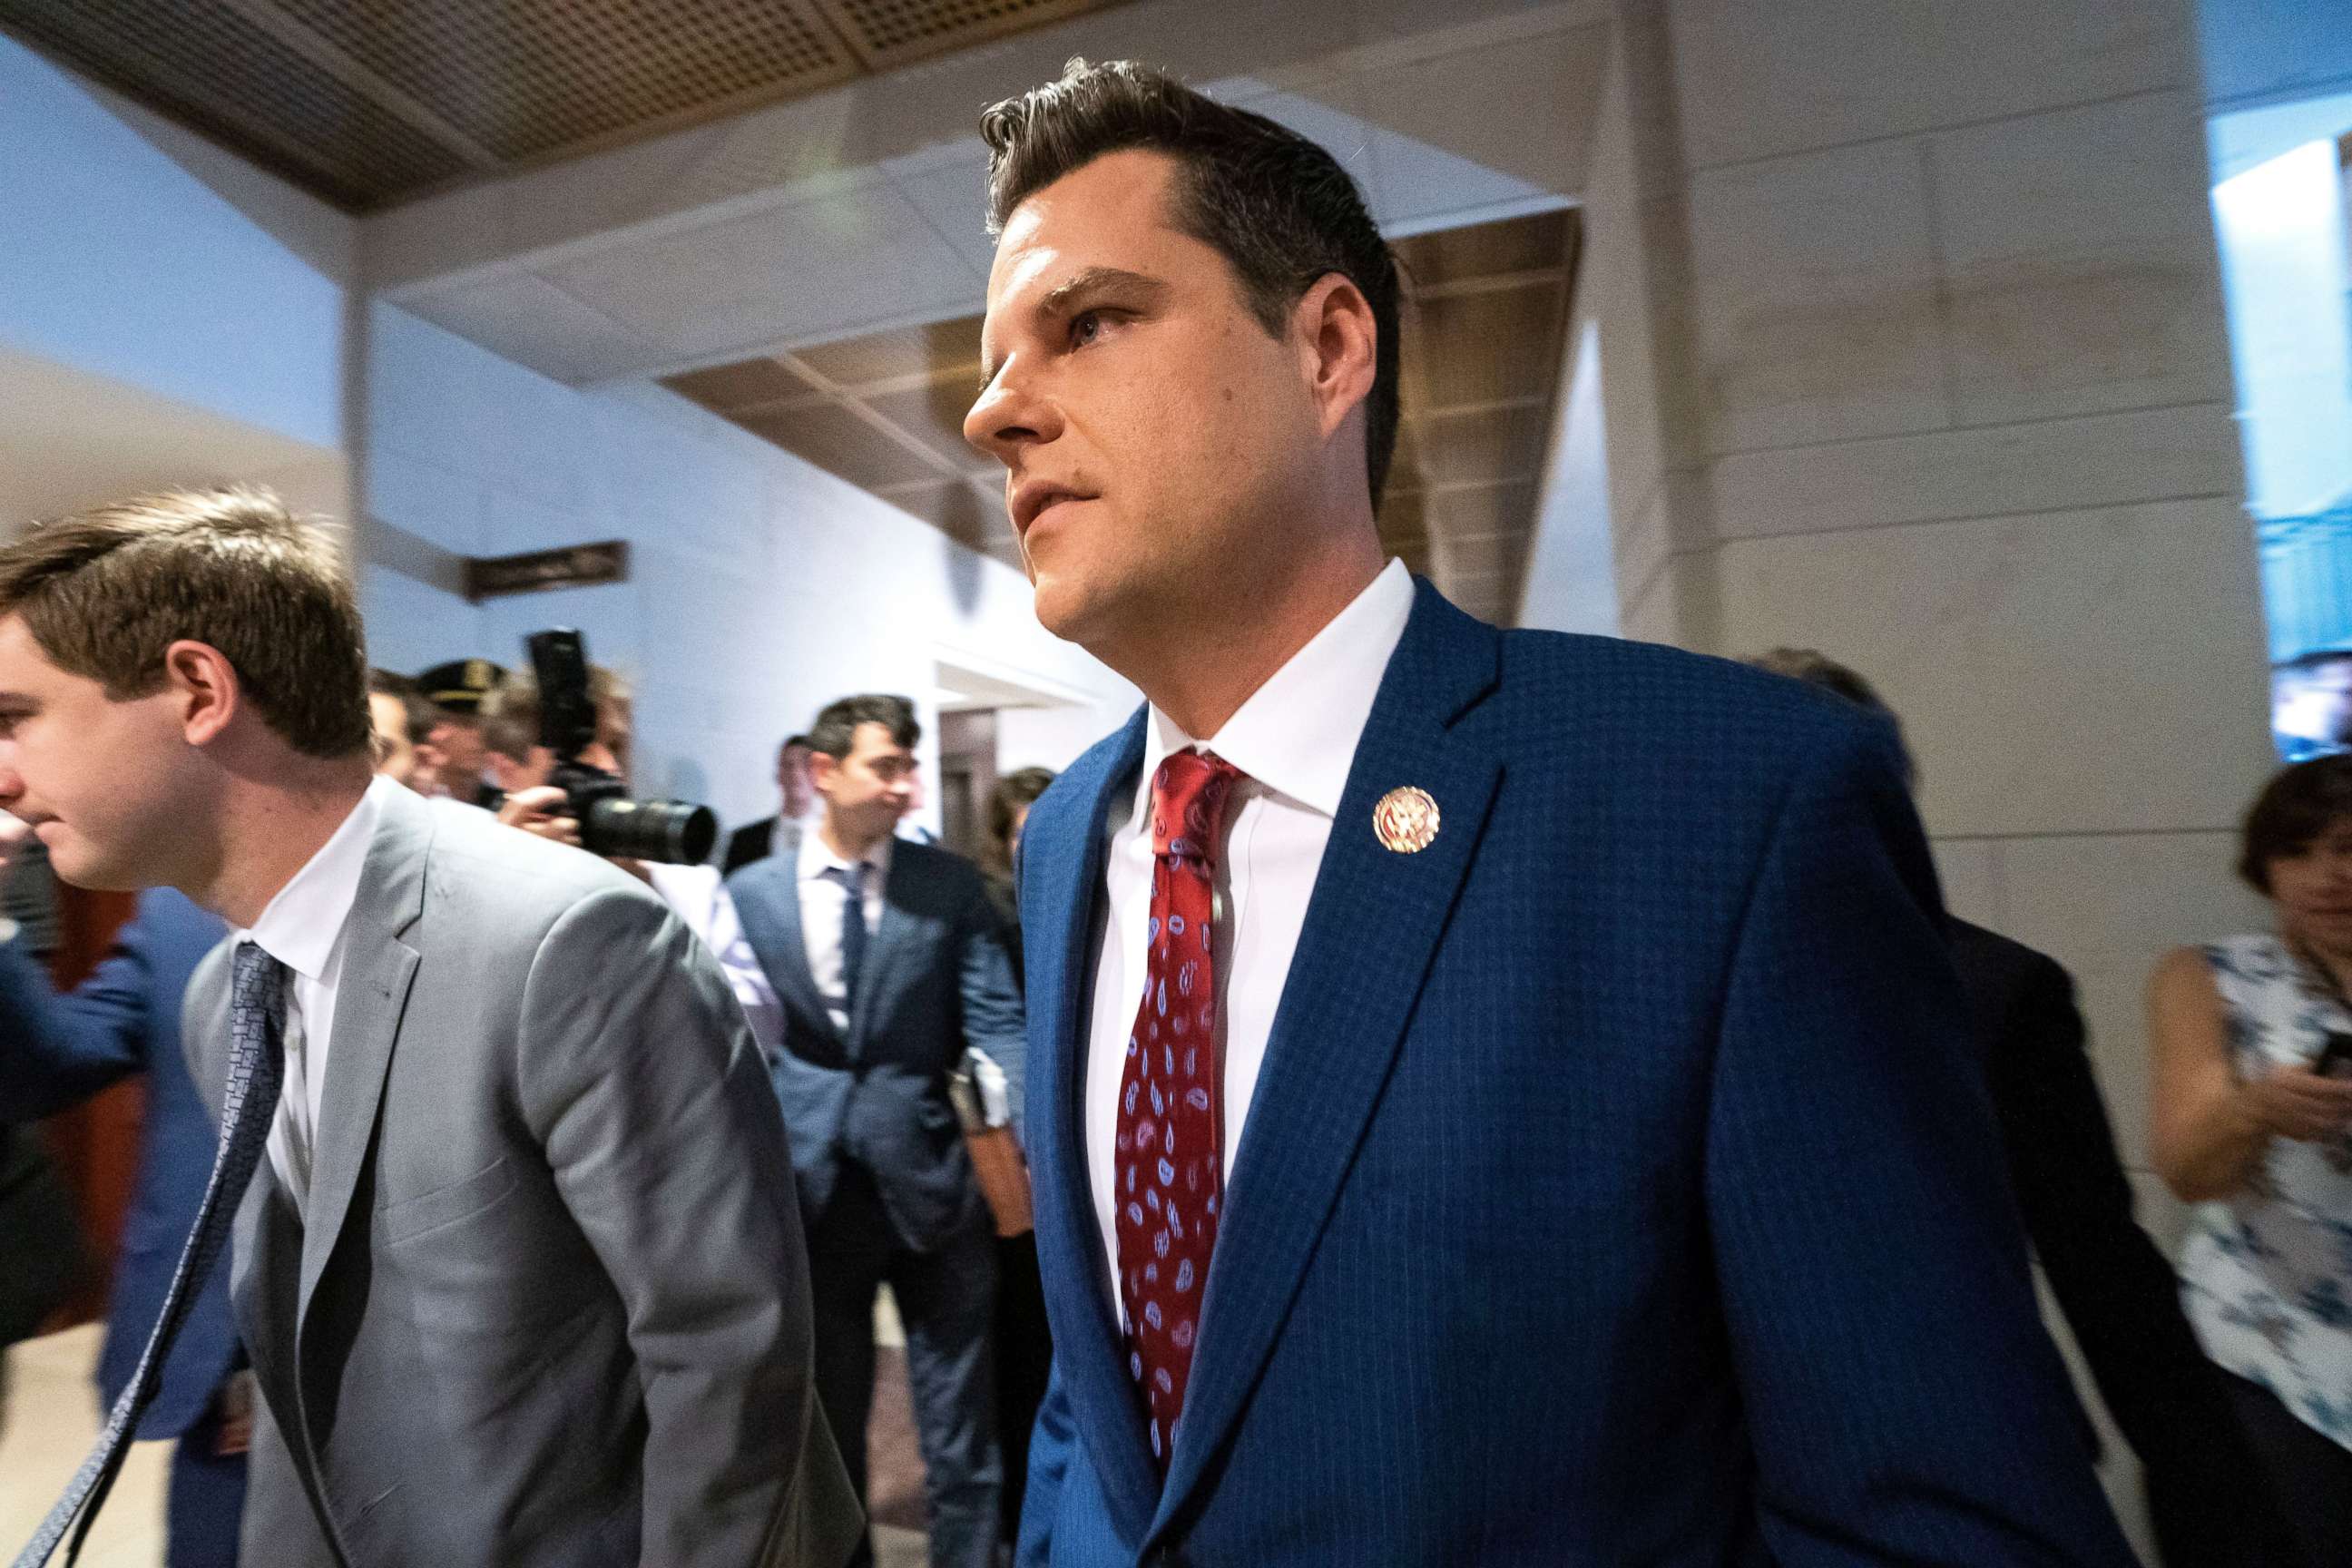 PHOTO: Republican Representative from Florida Matt Gaetz joins more than two dozen Republican lawmakers attempting to gather outside the room used by the House of Representatives' impeachment inquiry into President Trump in the US Capitol Oct. 23, 2019.